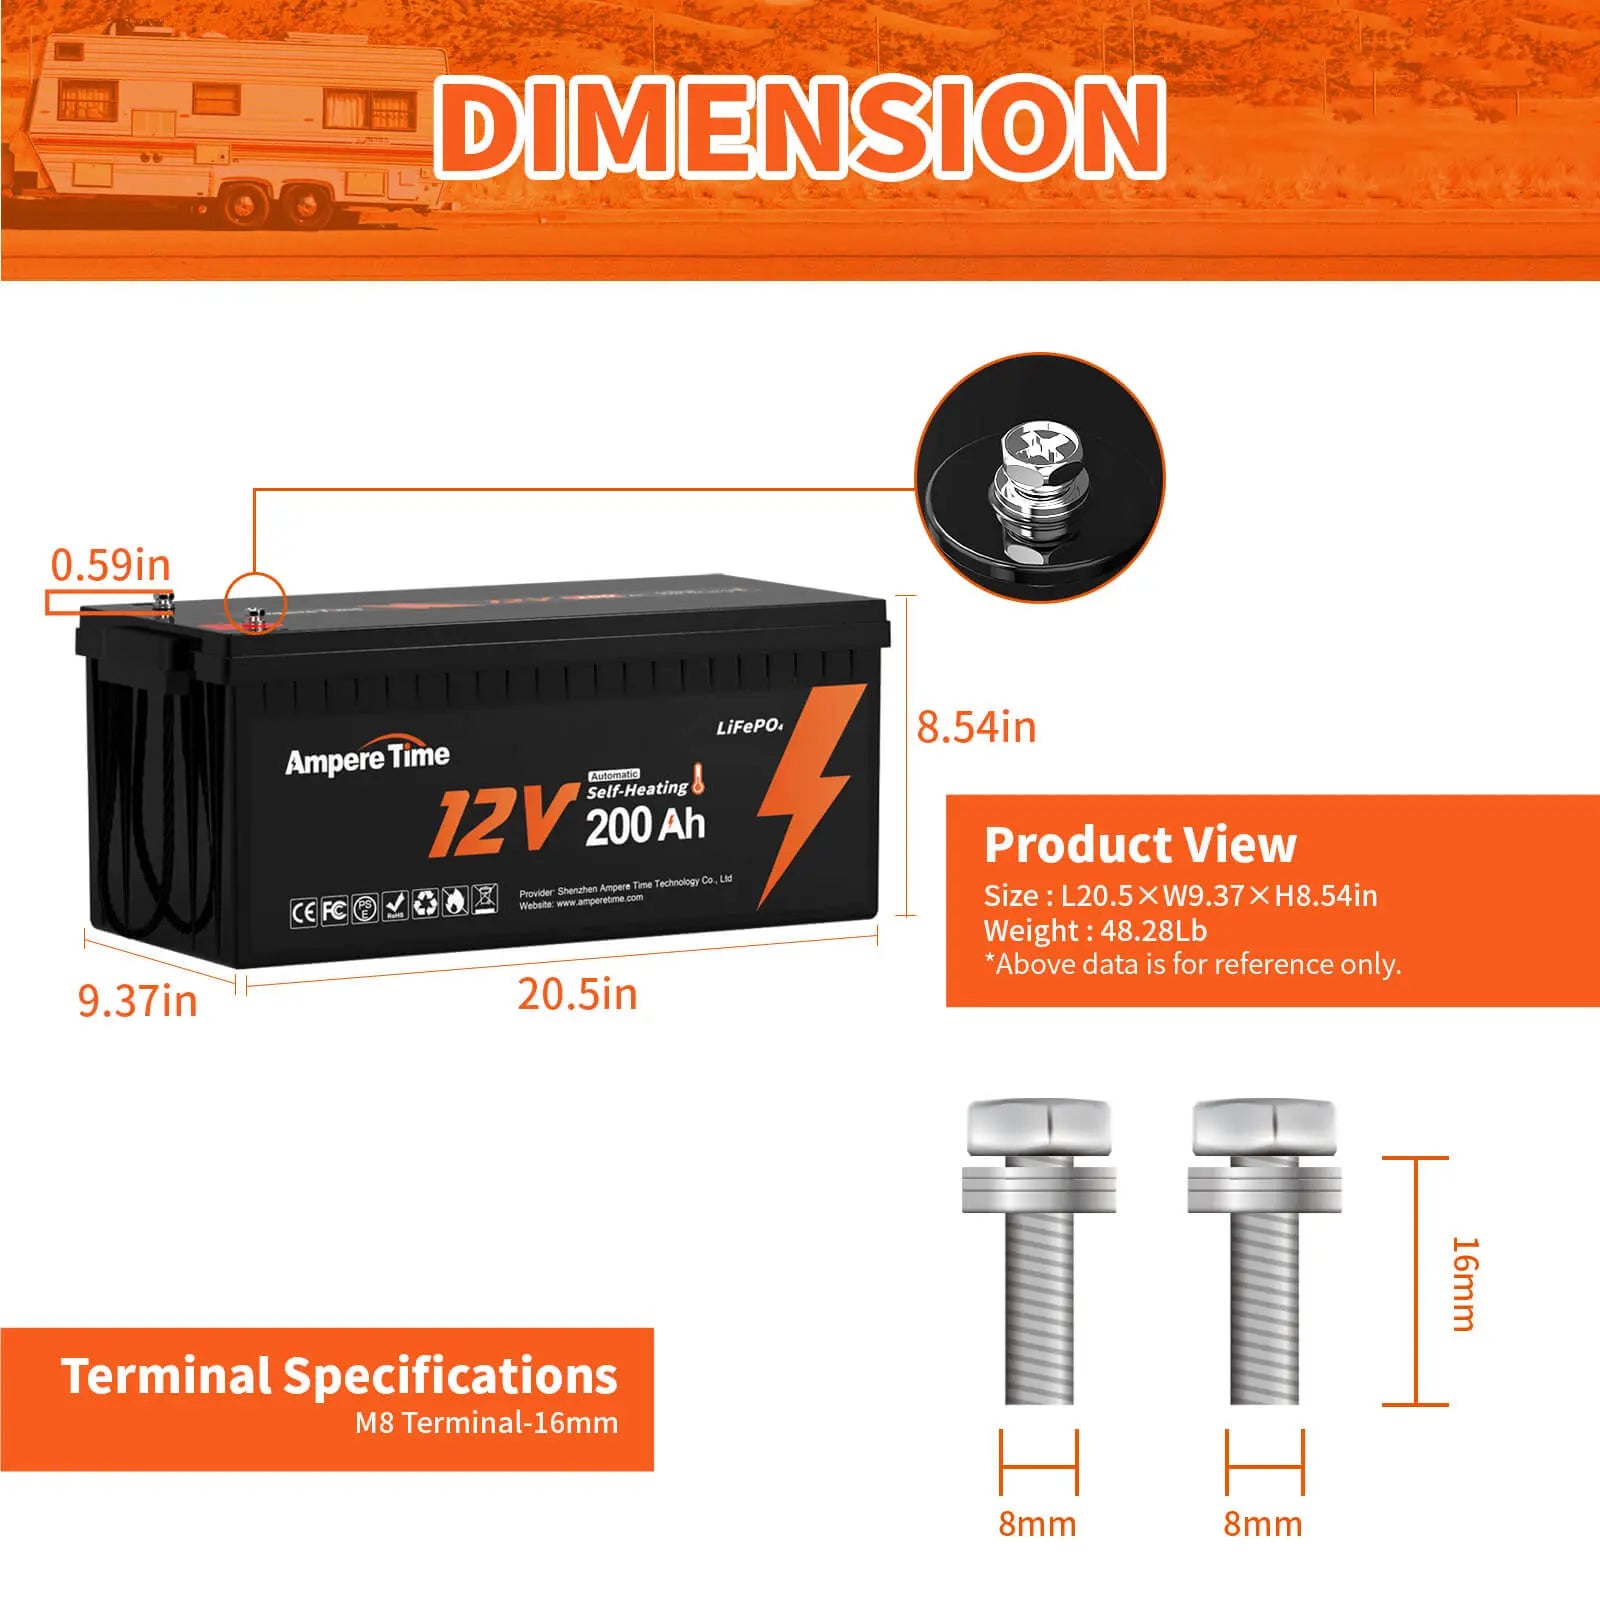 Ampere Time 12V 200Ah Lithium Battery with Self-Heating Low Temperature Charging (-4℉/-20°C)